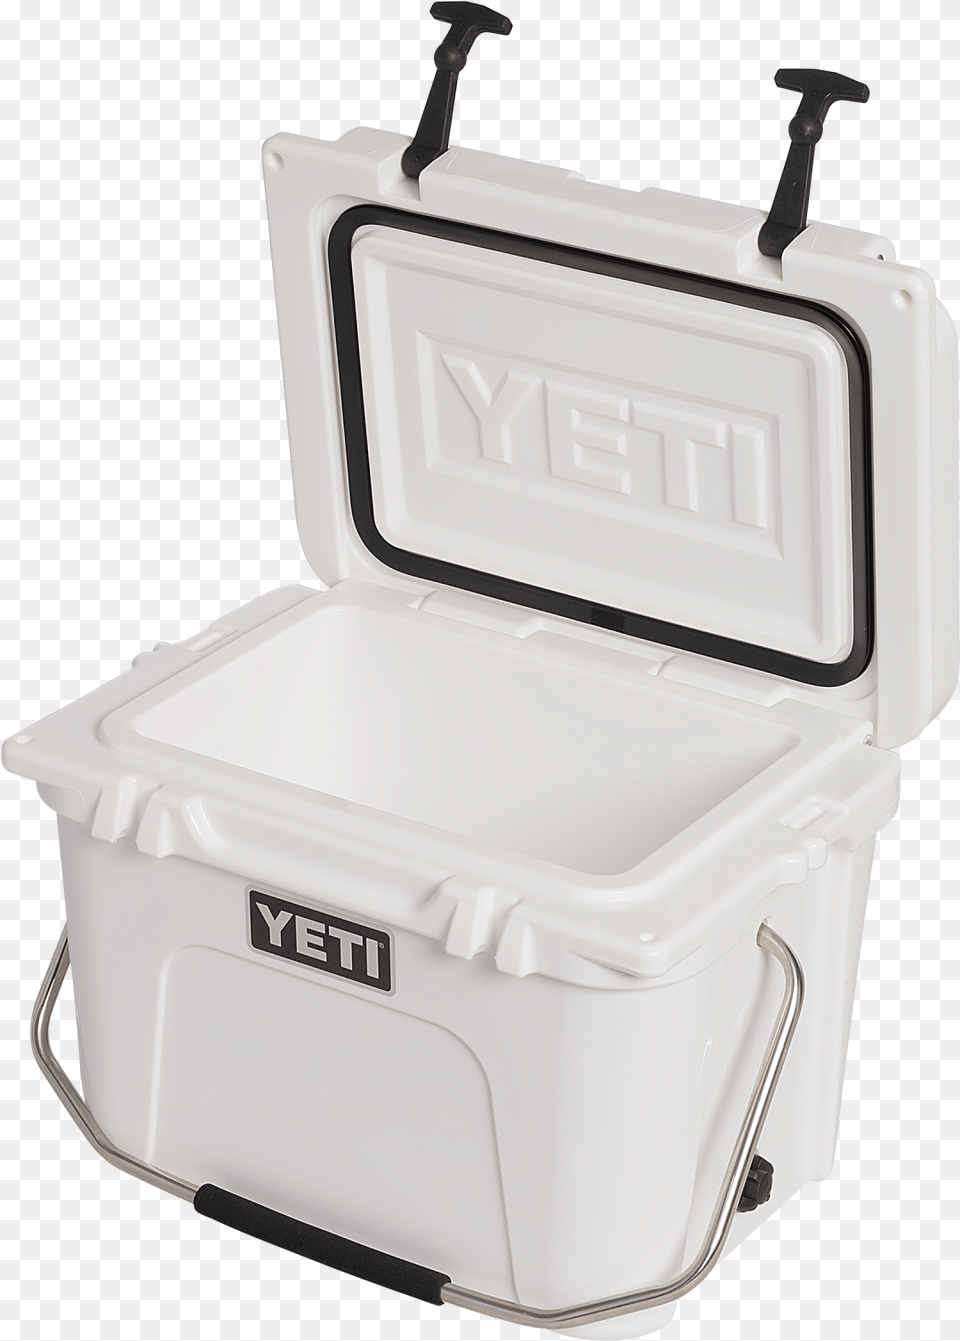 Yeti Roadie Cooler Roadie 20 Cooler Tan, Appliance, Device, Electrical Device Png Image